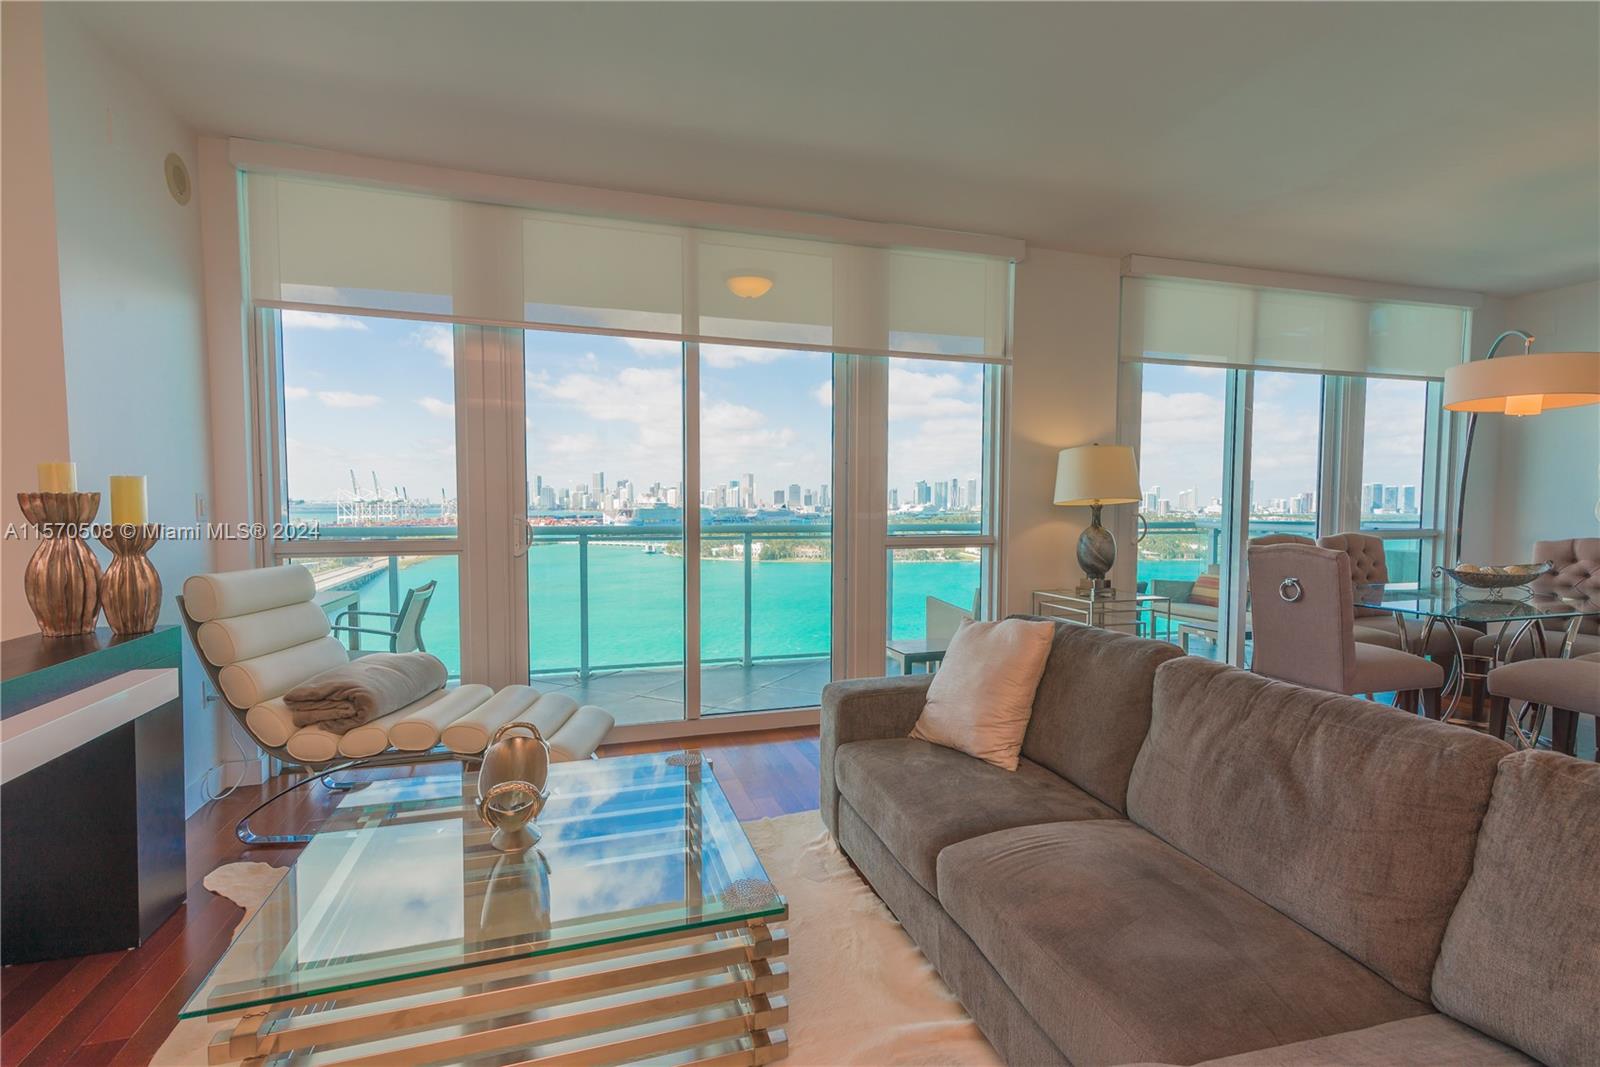 Enjoy a spectacular wide bay view of the Miami Skyline in this gorgeous 1 bedroom and den with 2 full bathrooms. This unit has beautiful kitchen, walk in closets, and a jacuzzi tub. There is great lighting and amazing modern furnishings. The Bentley Bay is close proximity to grocery stores, dining and the South Beach neighborhood. There is a beautiful pool, gym with updated equipment, front desk attendants, and valet services.